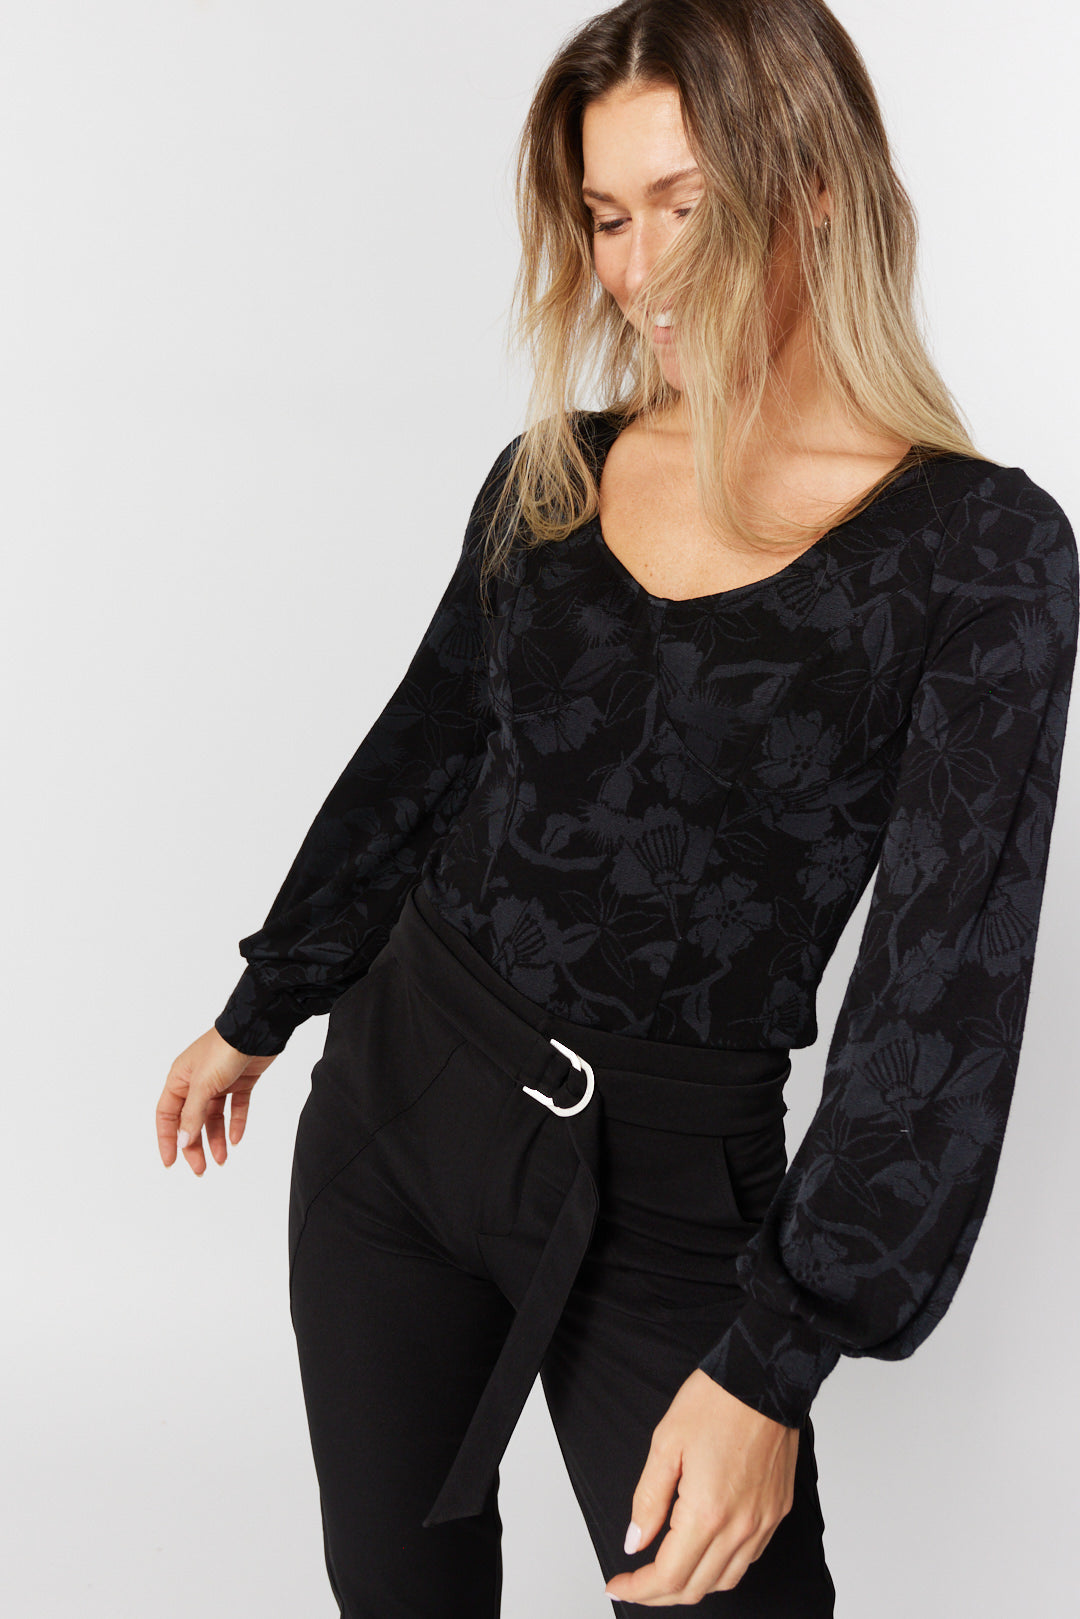 Black corset sweater with floral patterns | Sandy